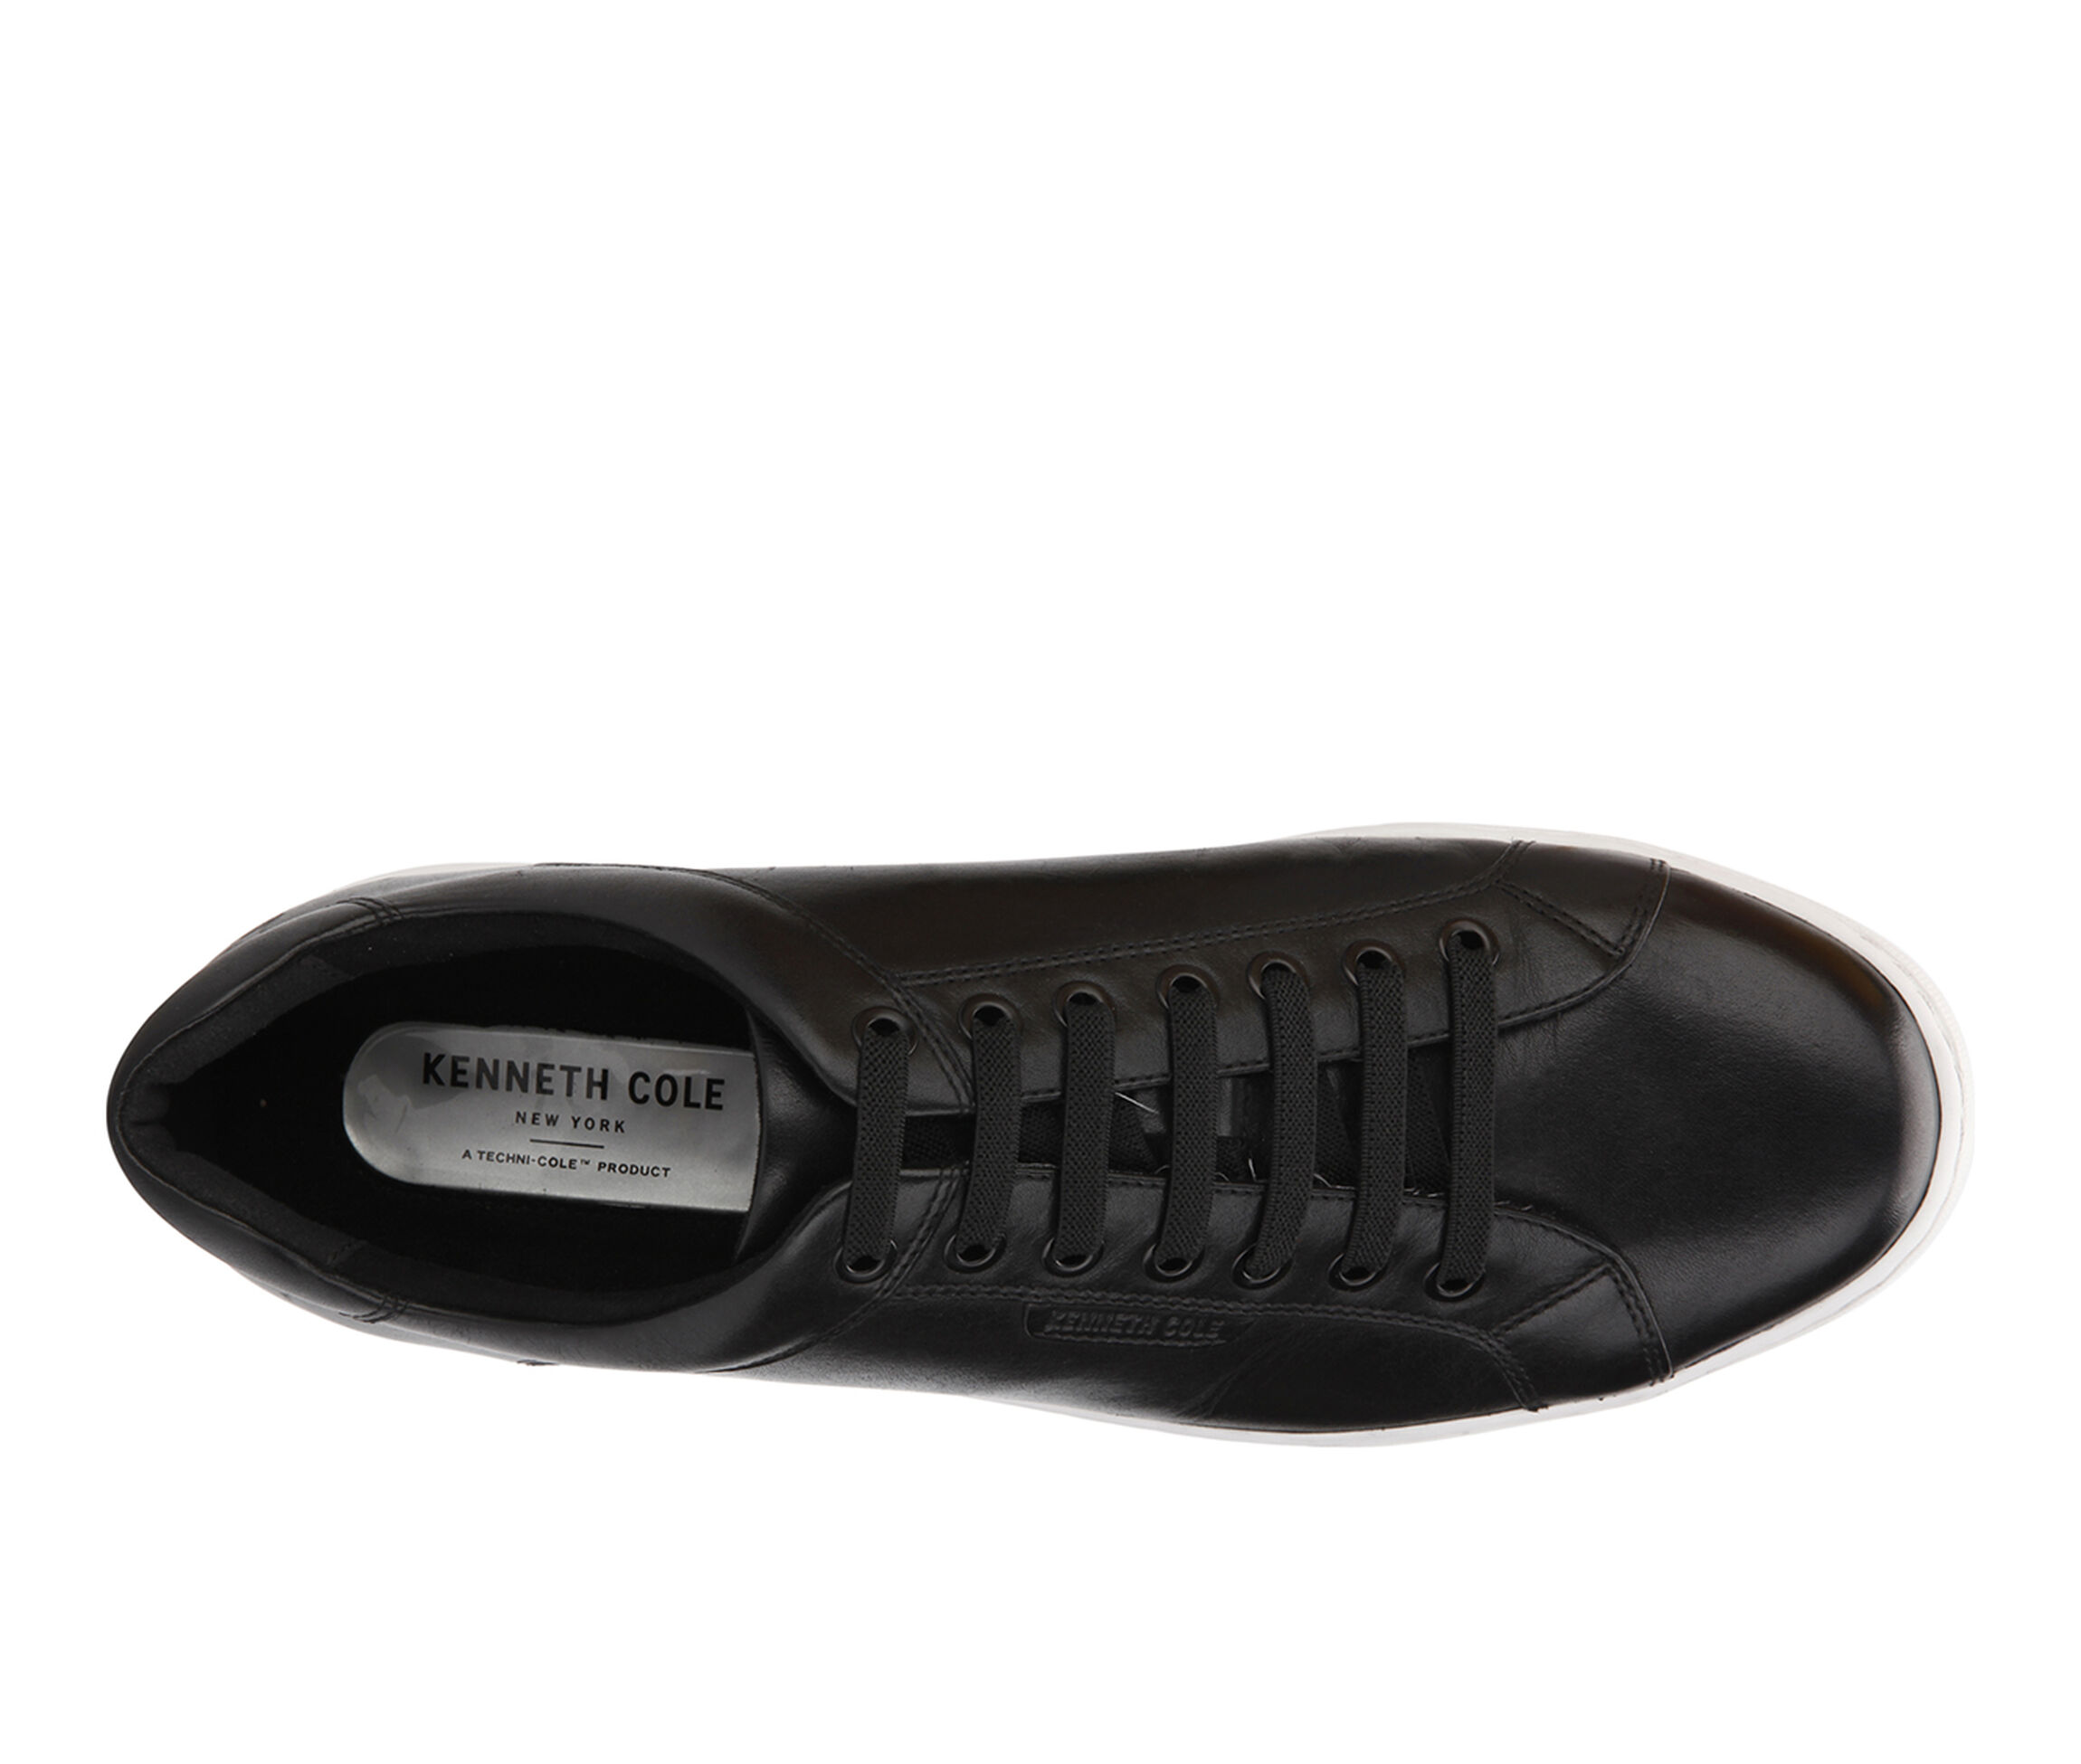 Kenneth Cole New York Shoes | Shoe Carnival